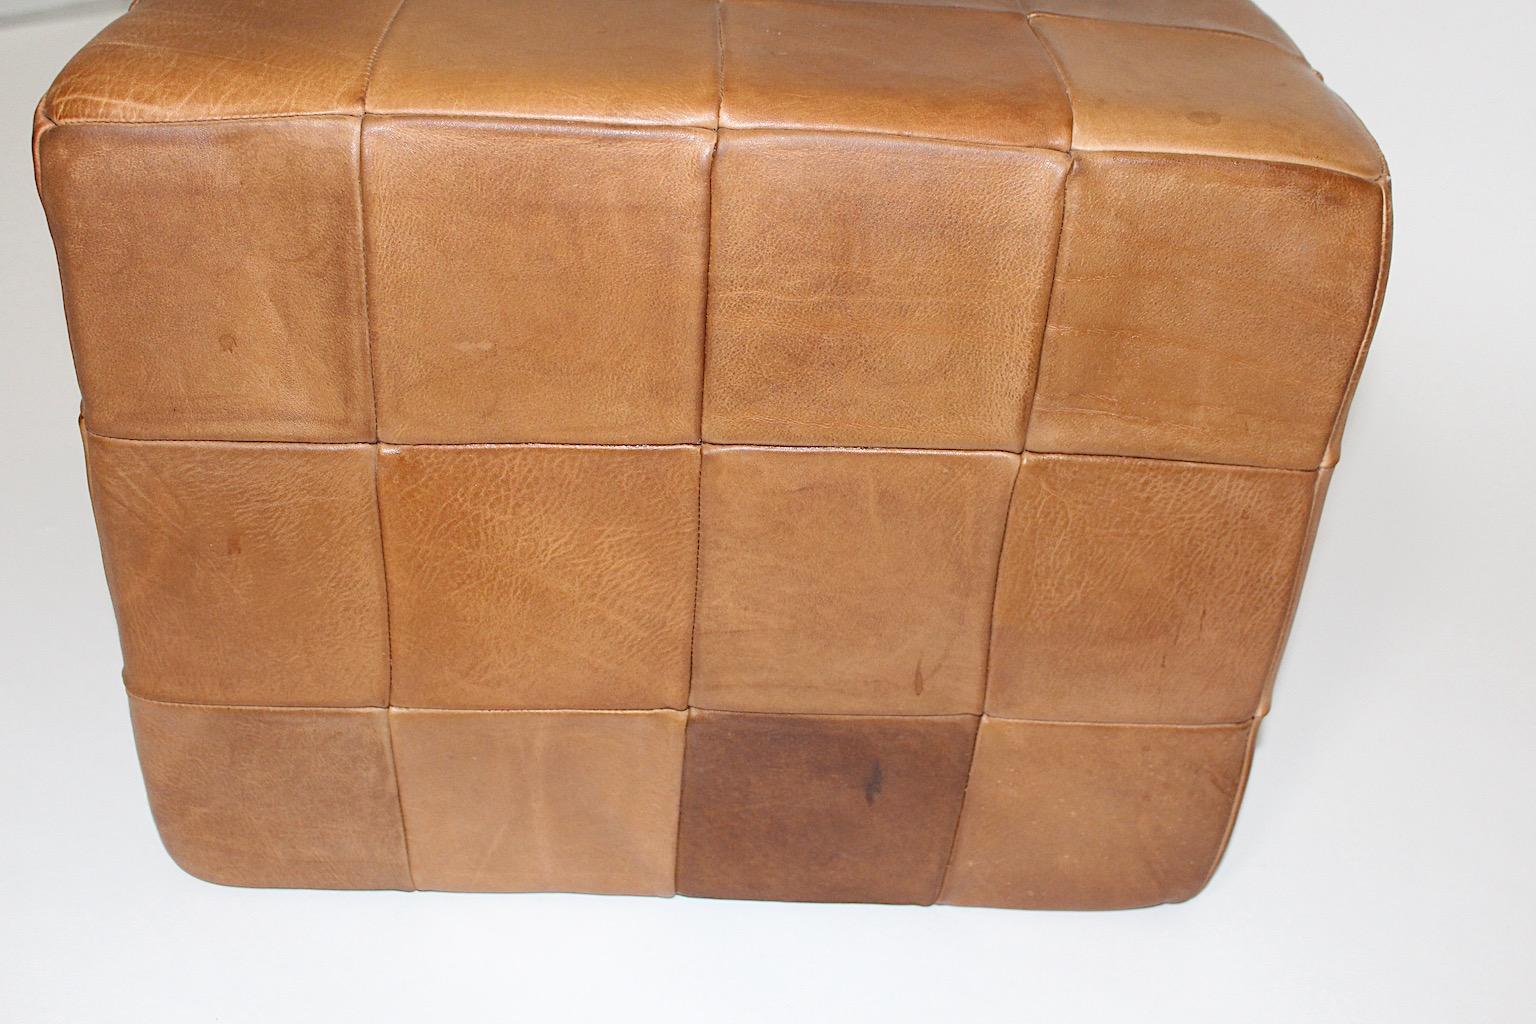 Modernist Organic Vintage Brown Patchwork Leather Cubus Stool DeSede 1970s For Sale 6